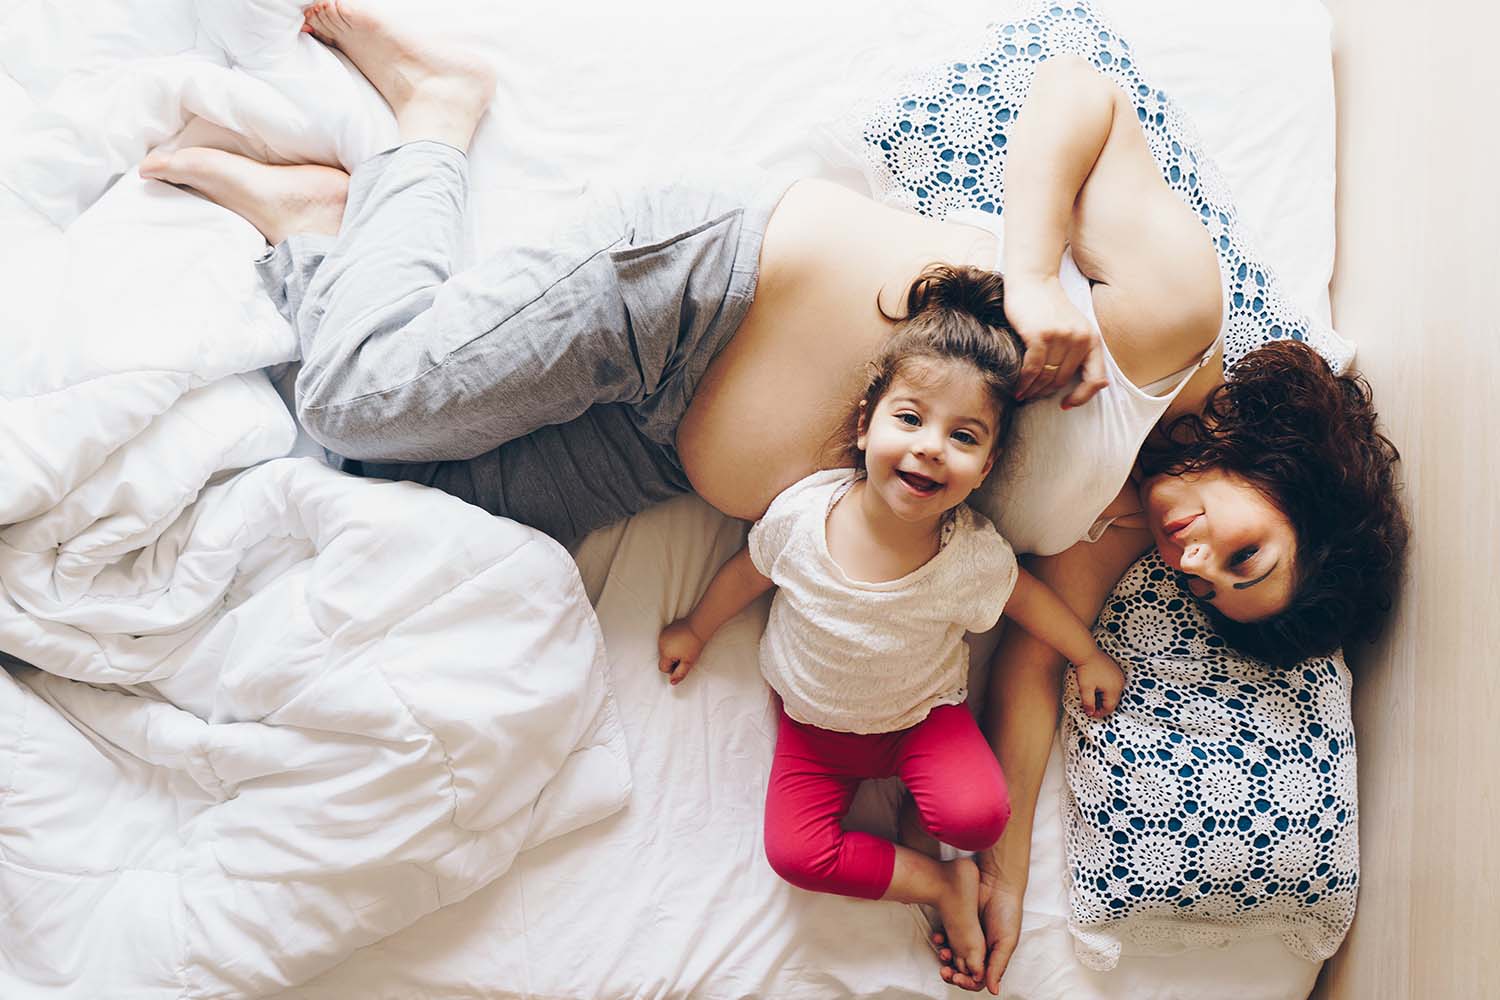 Pregnant woman reclining on a bed with a toddler smiling and leaning against her